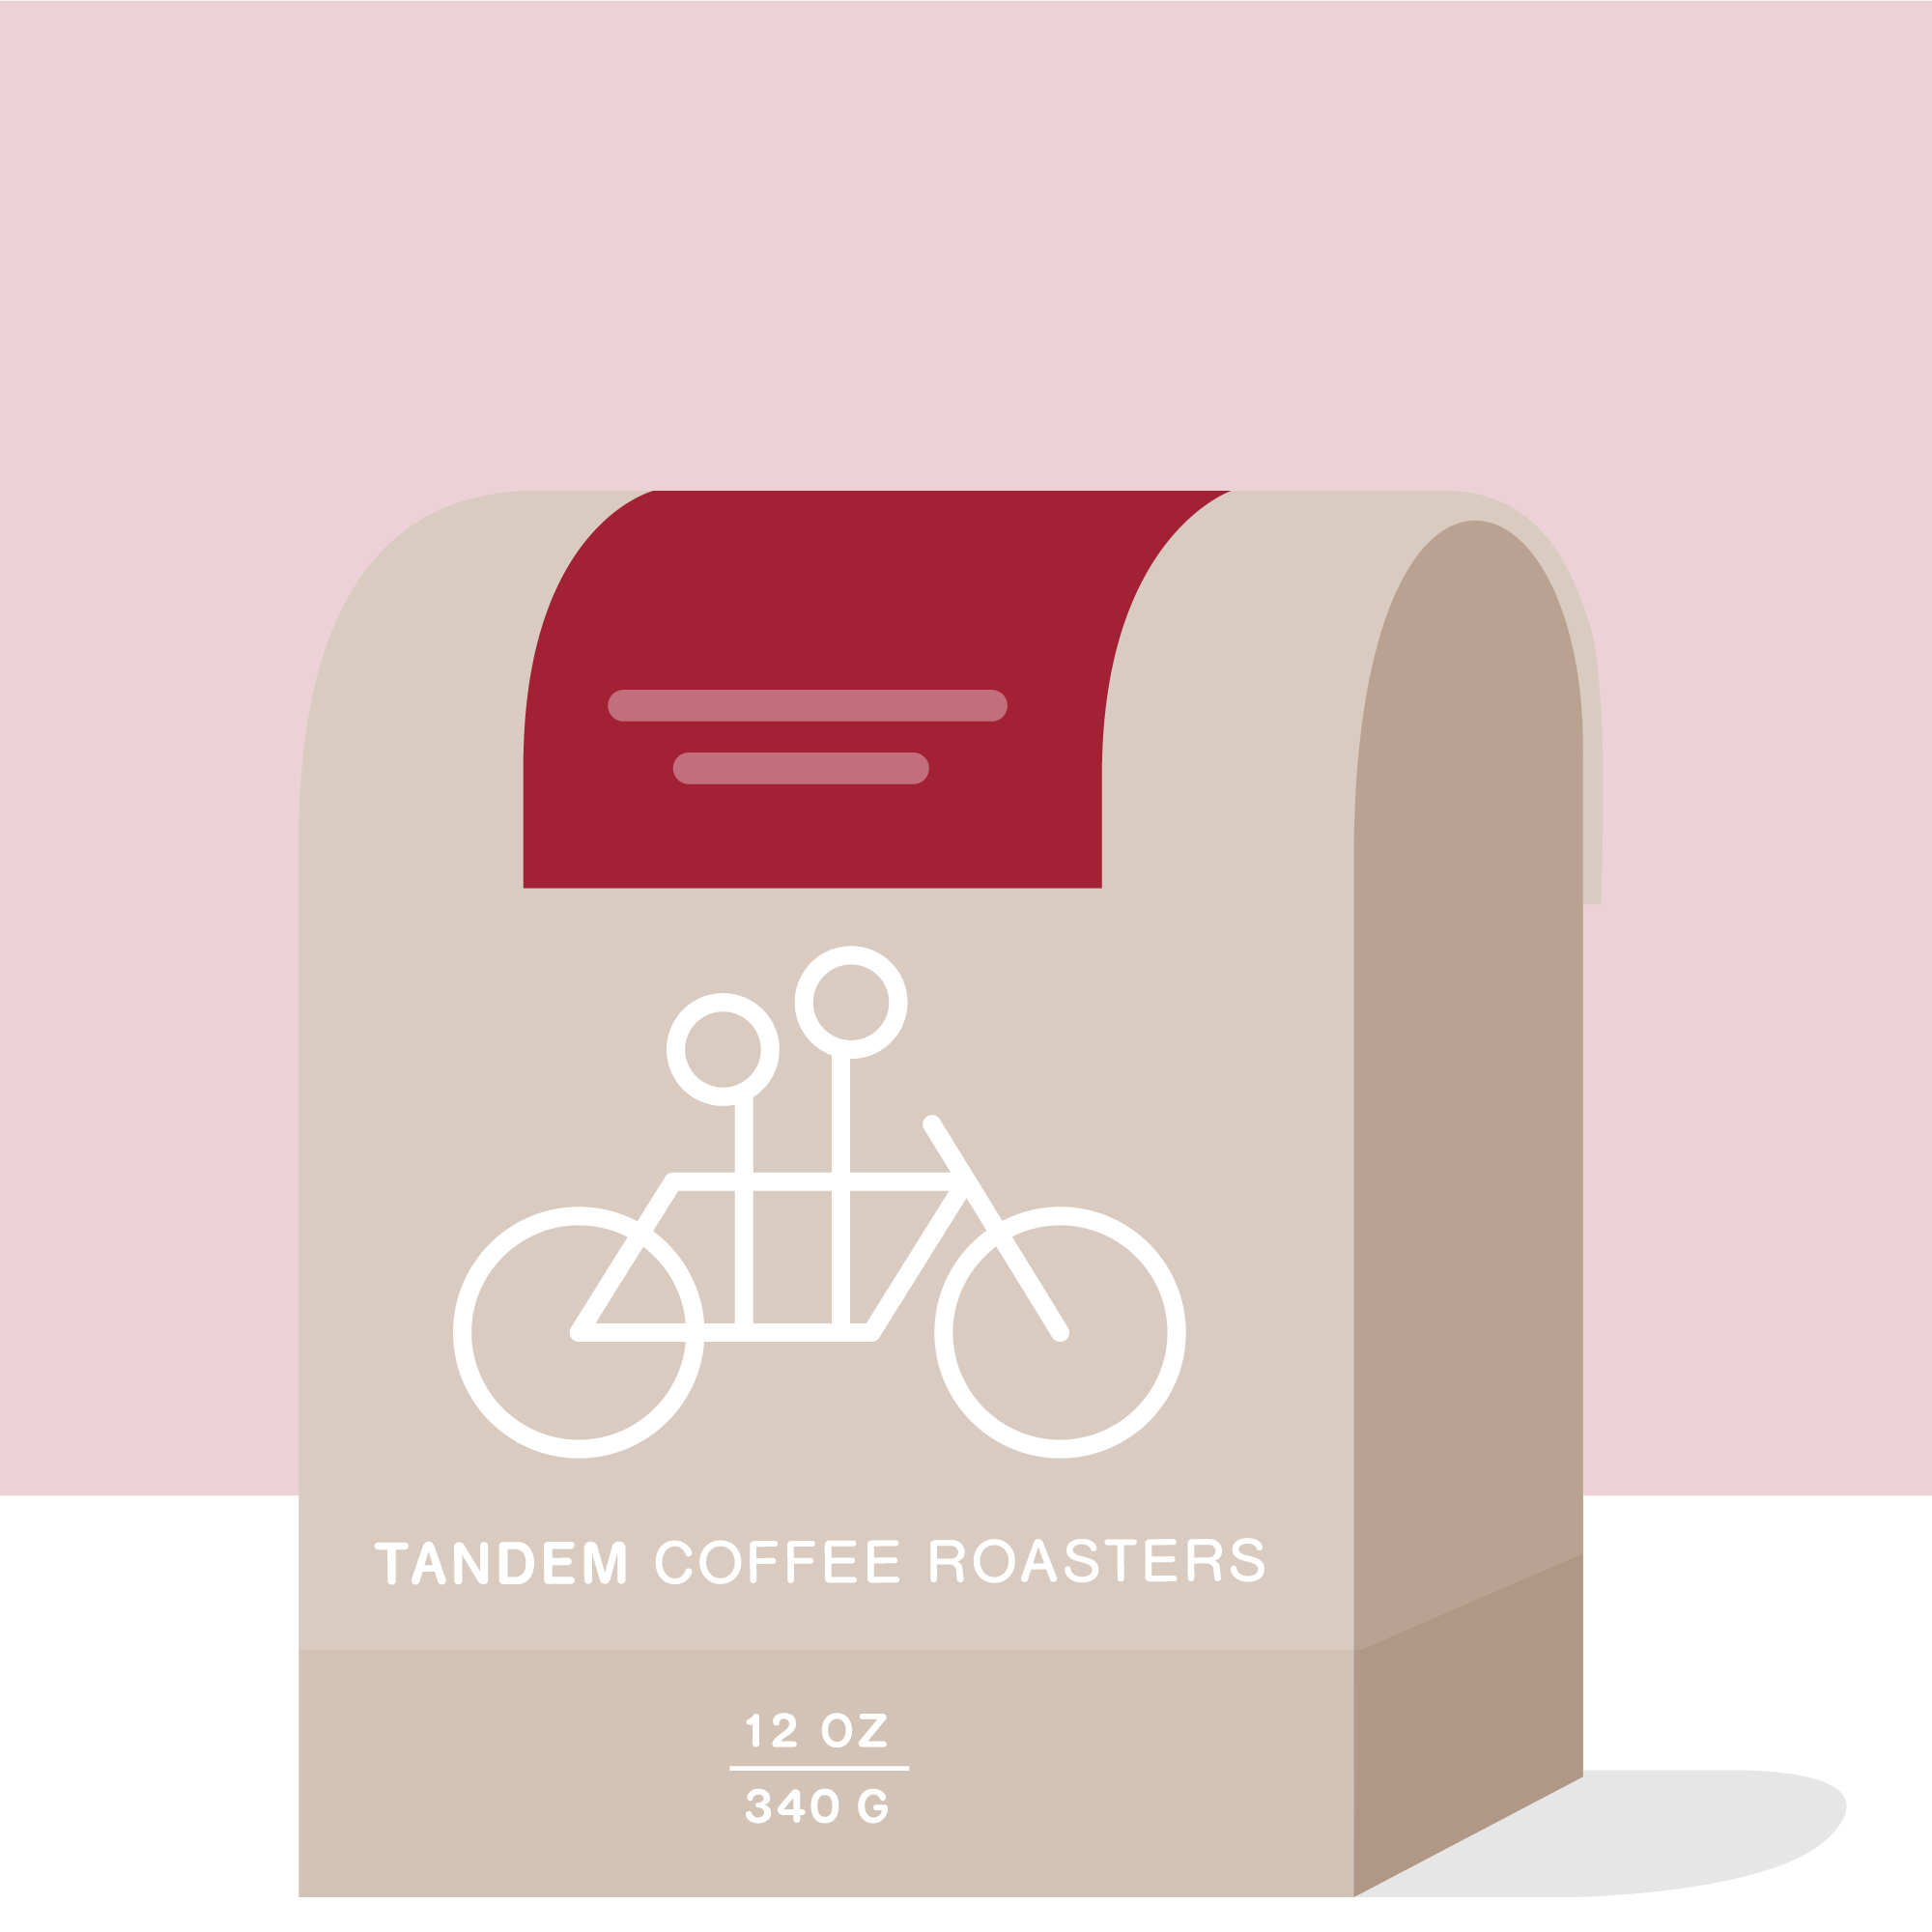 A flat-designed image of a beige Shyira - Rwanda coffee bag from Tandem Coffee Roasters with a tandem bicycle icon, situated against a dark red background. The bag is labeled "12 oz 340